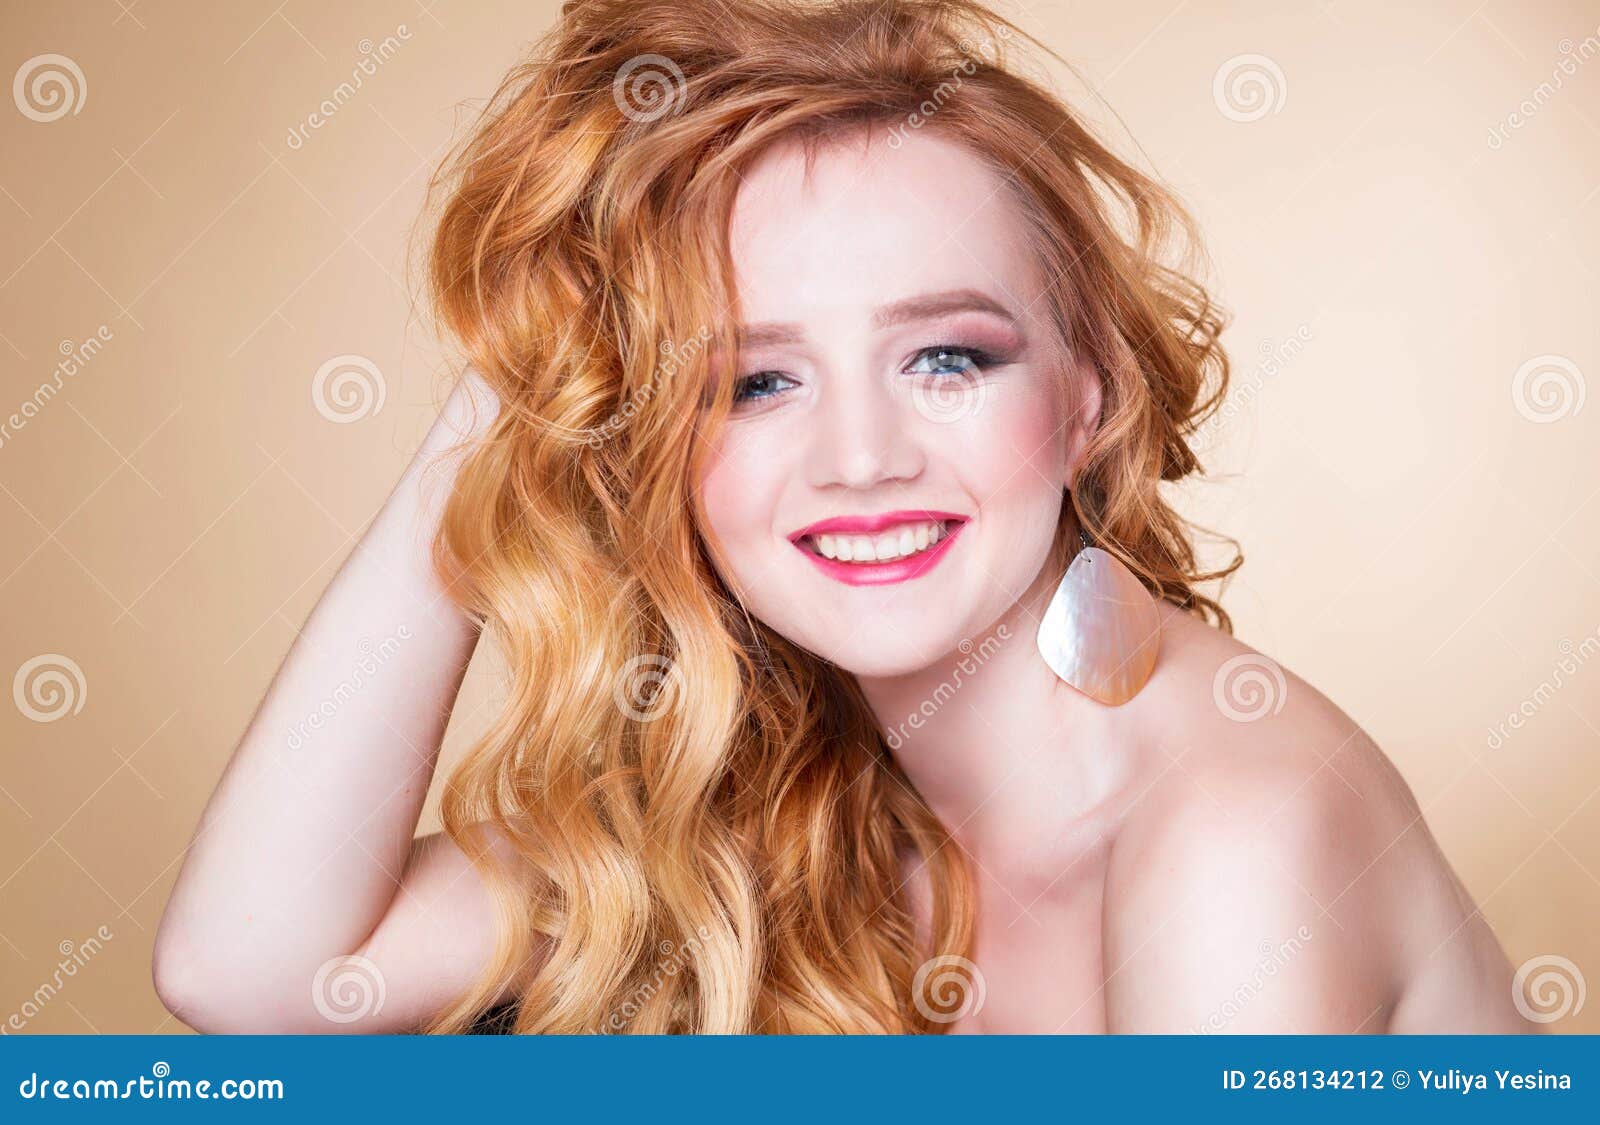 Smiling blonde girl with wavy hair waving hello - wide 3